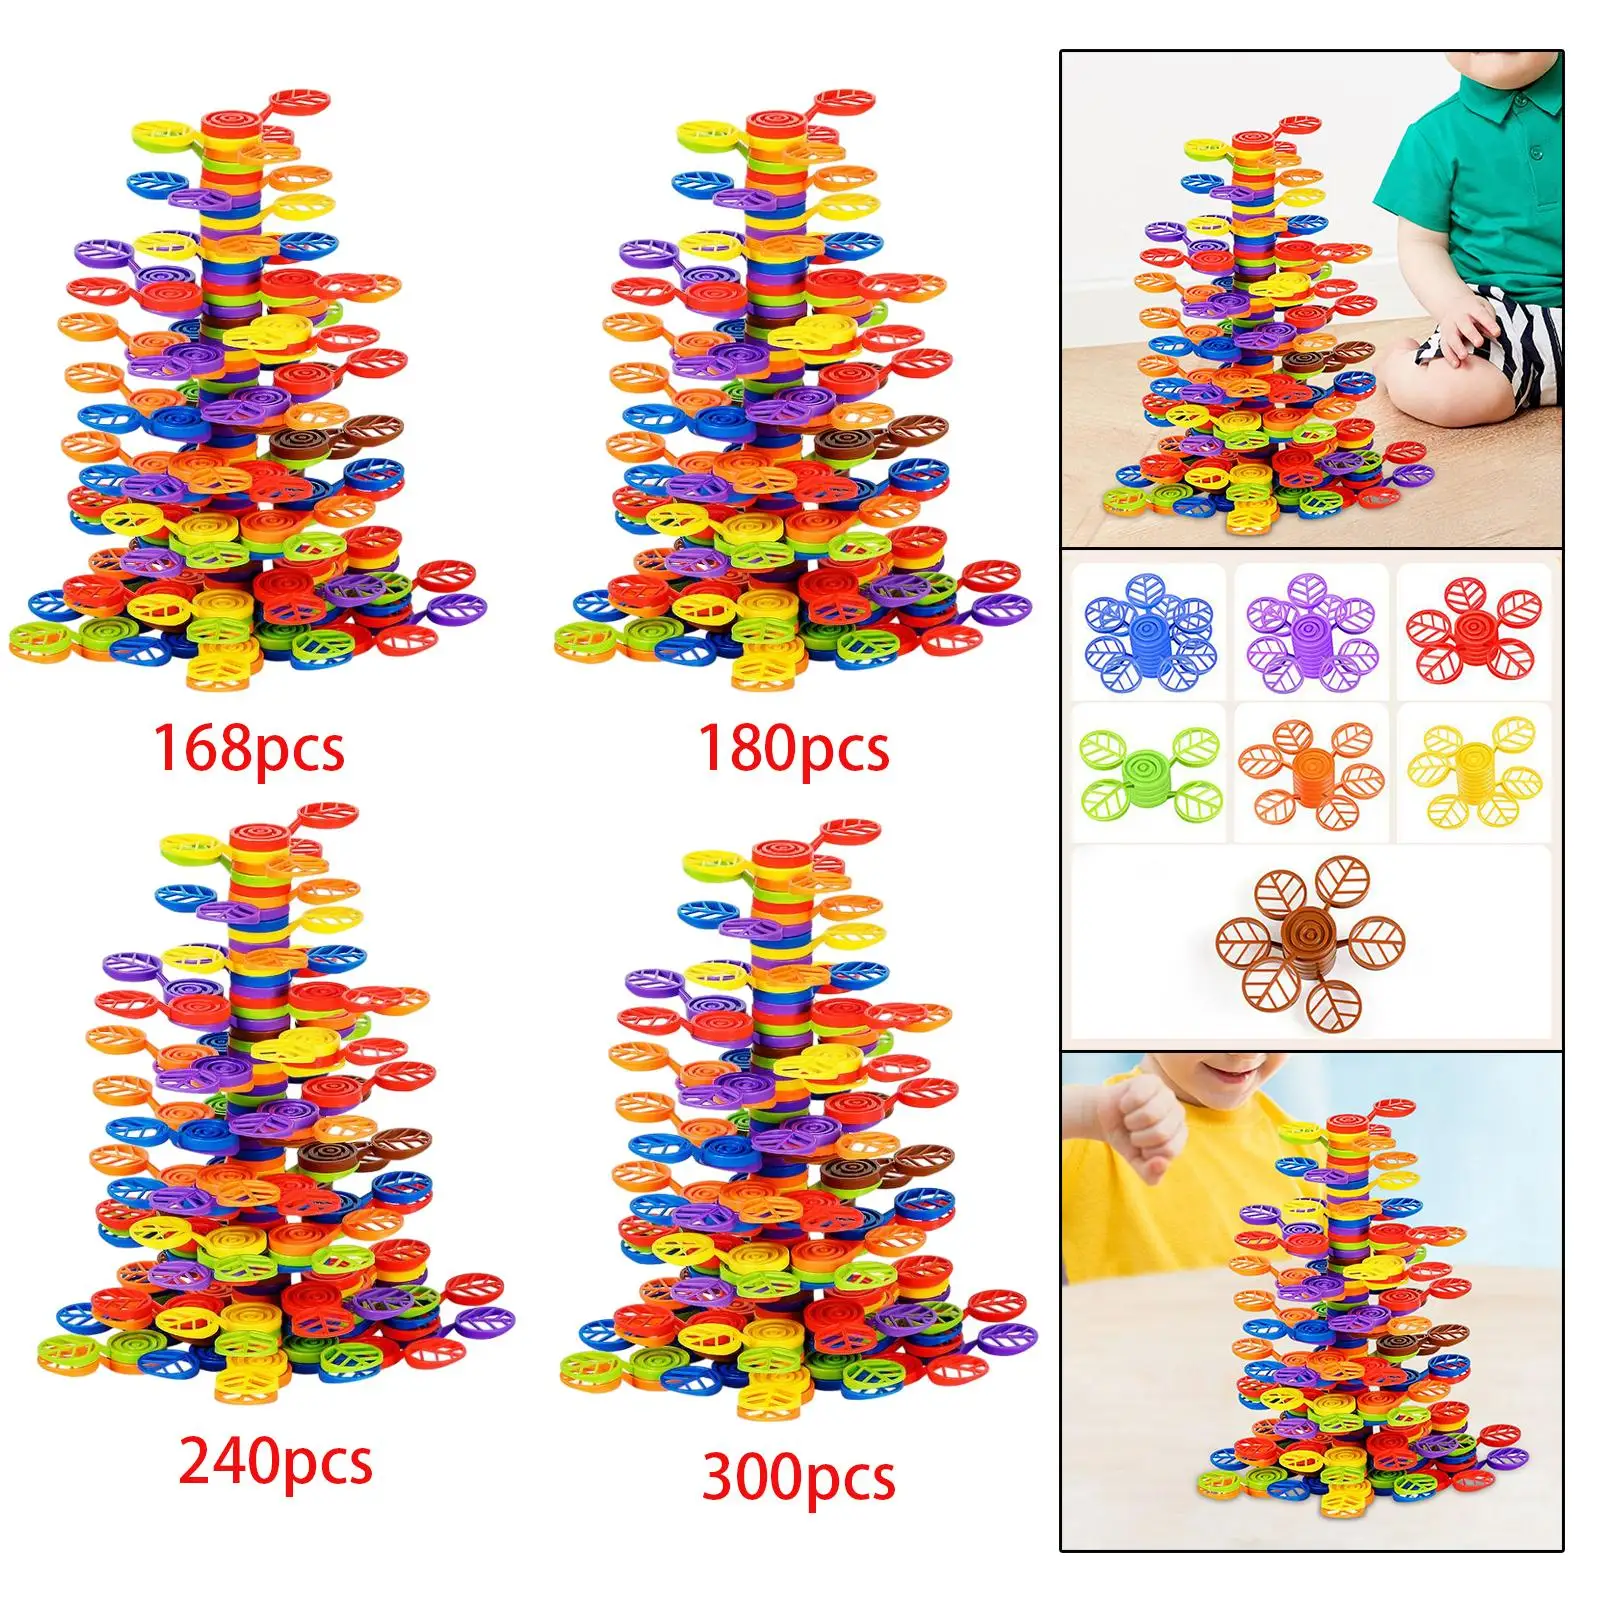 Stacking Games Toys Balance Game Building Toys for Boys Girls Birthday Gifts